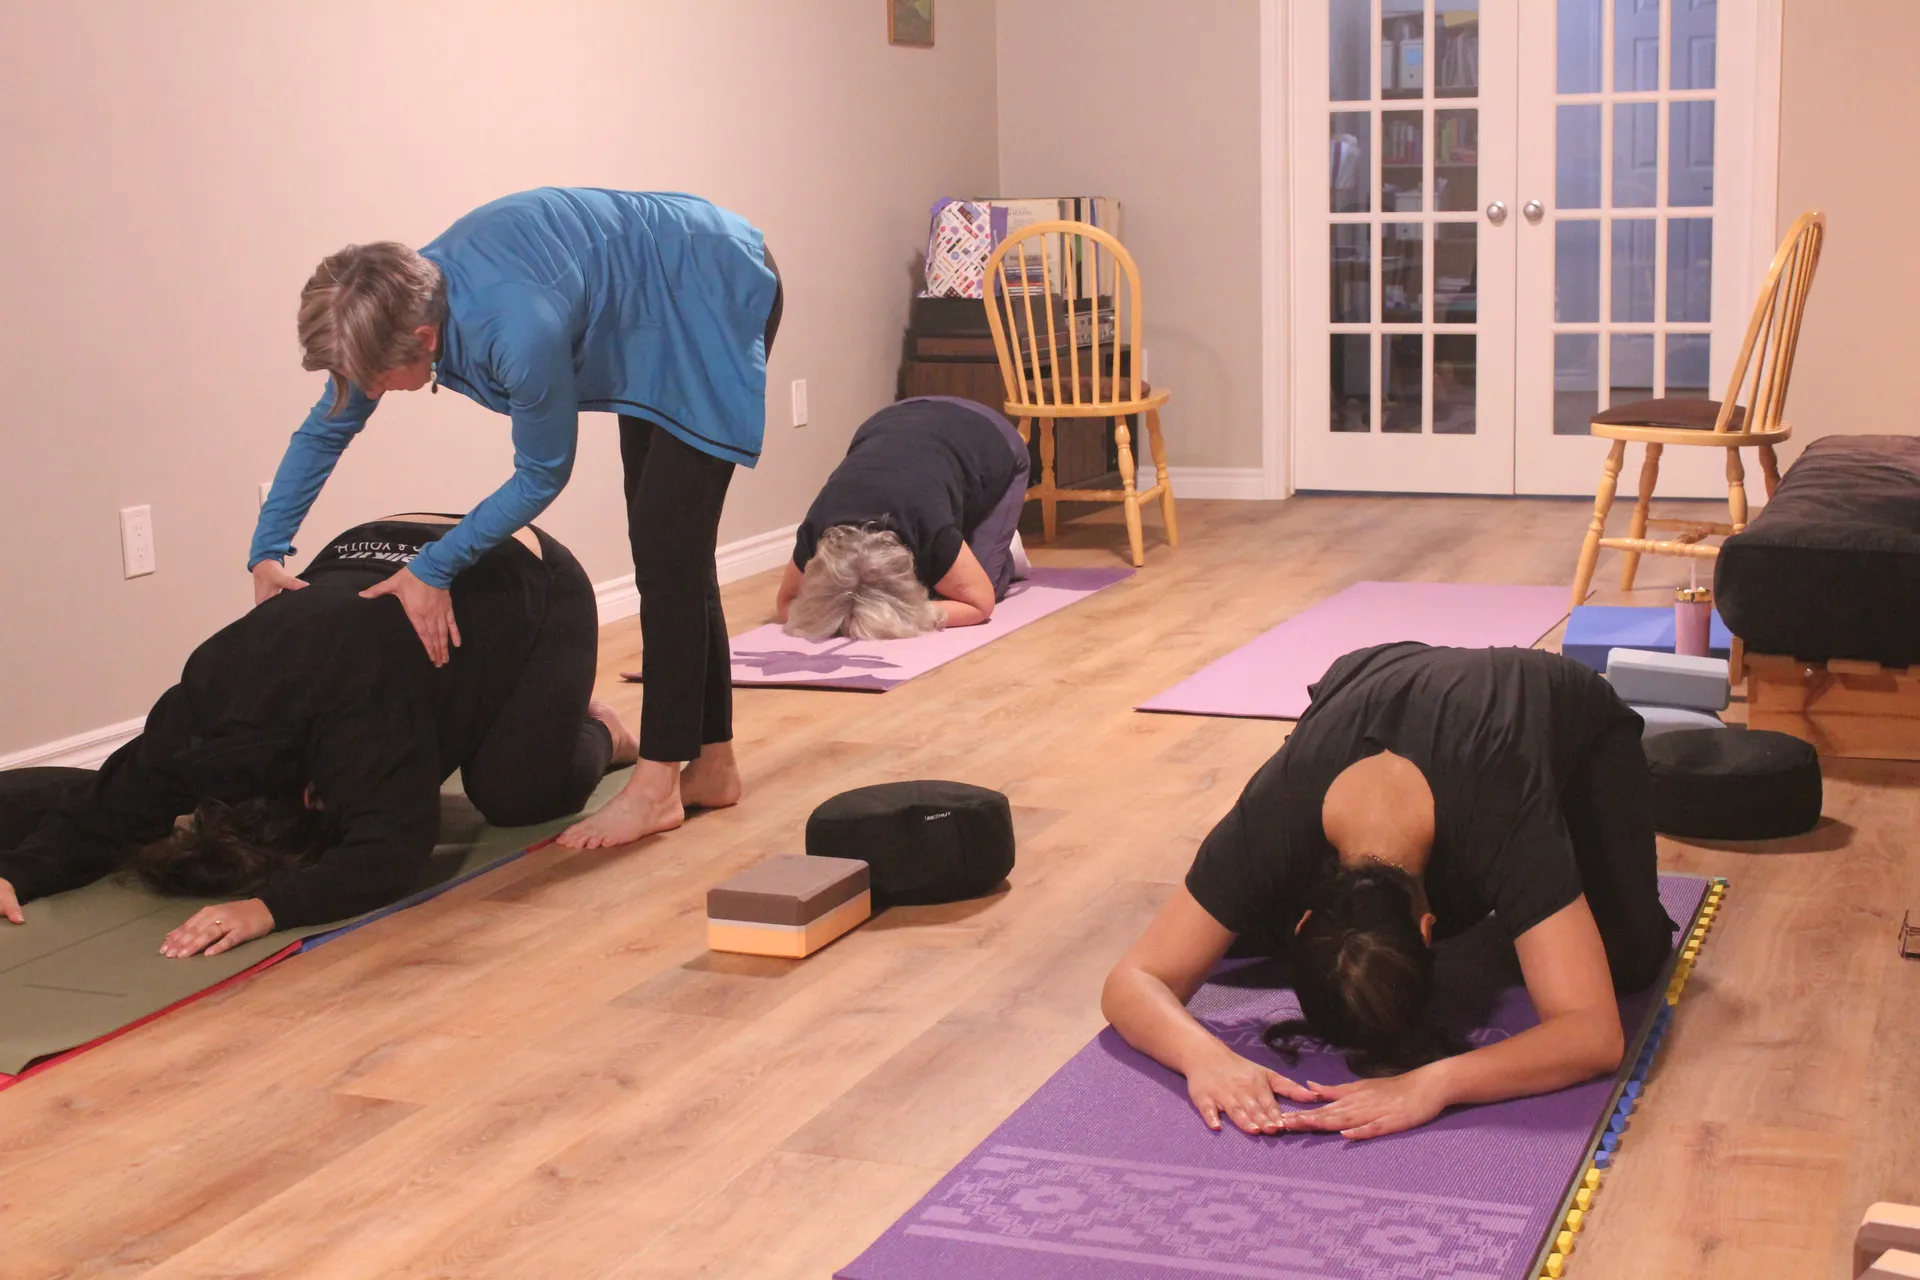 Class being held in a london yoga studio